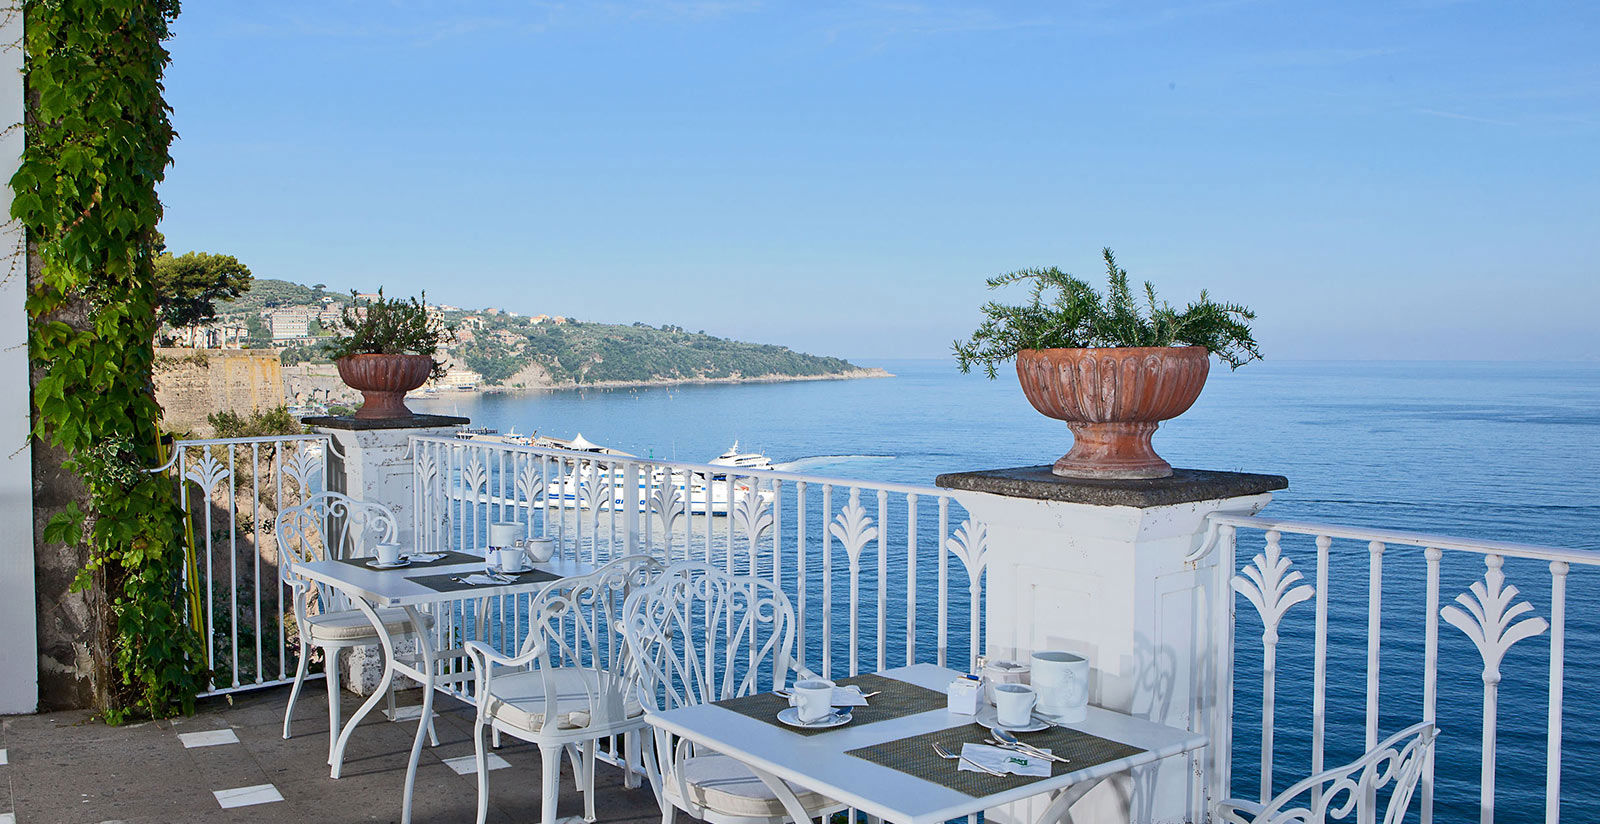 Grand Hotel Riviera, a luxury location for weddings in Sorrento